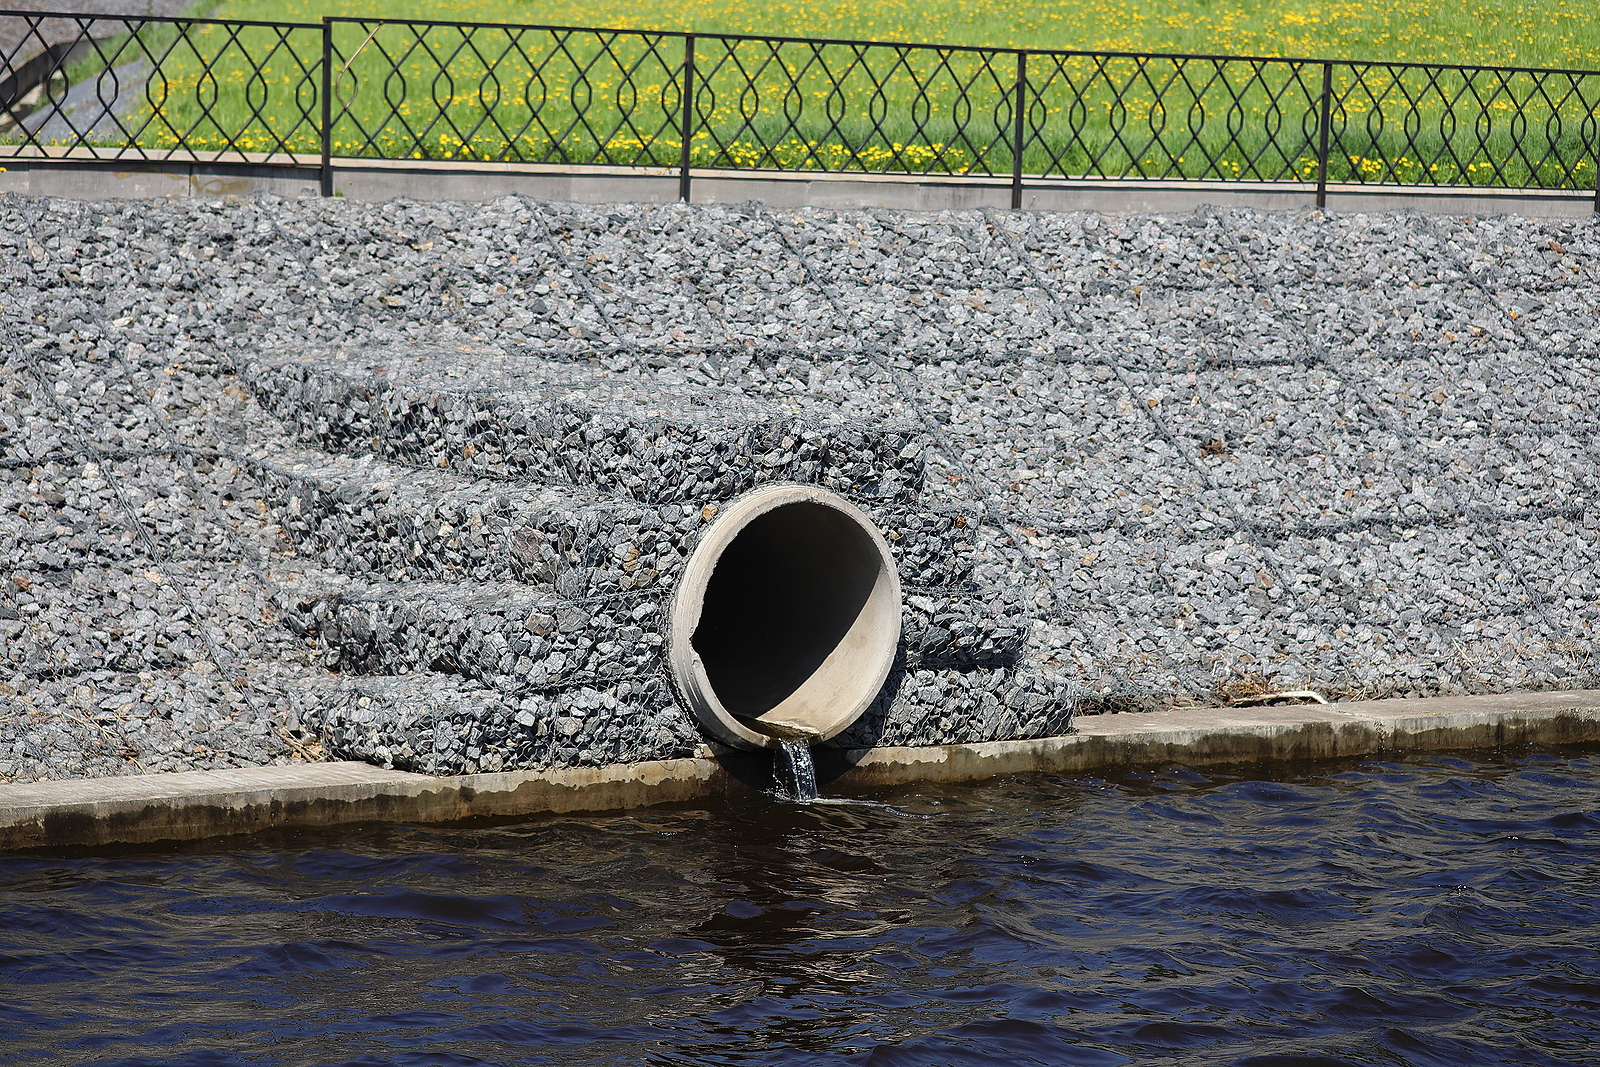 Water Outflows In The River Through Flood Drainage System.